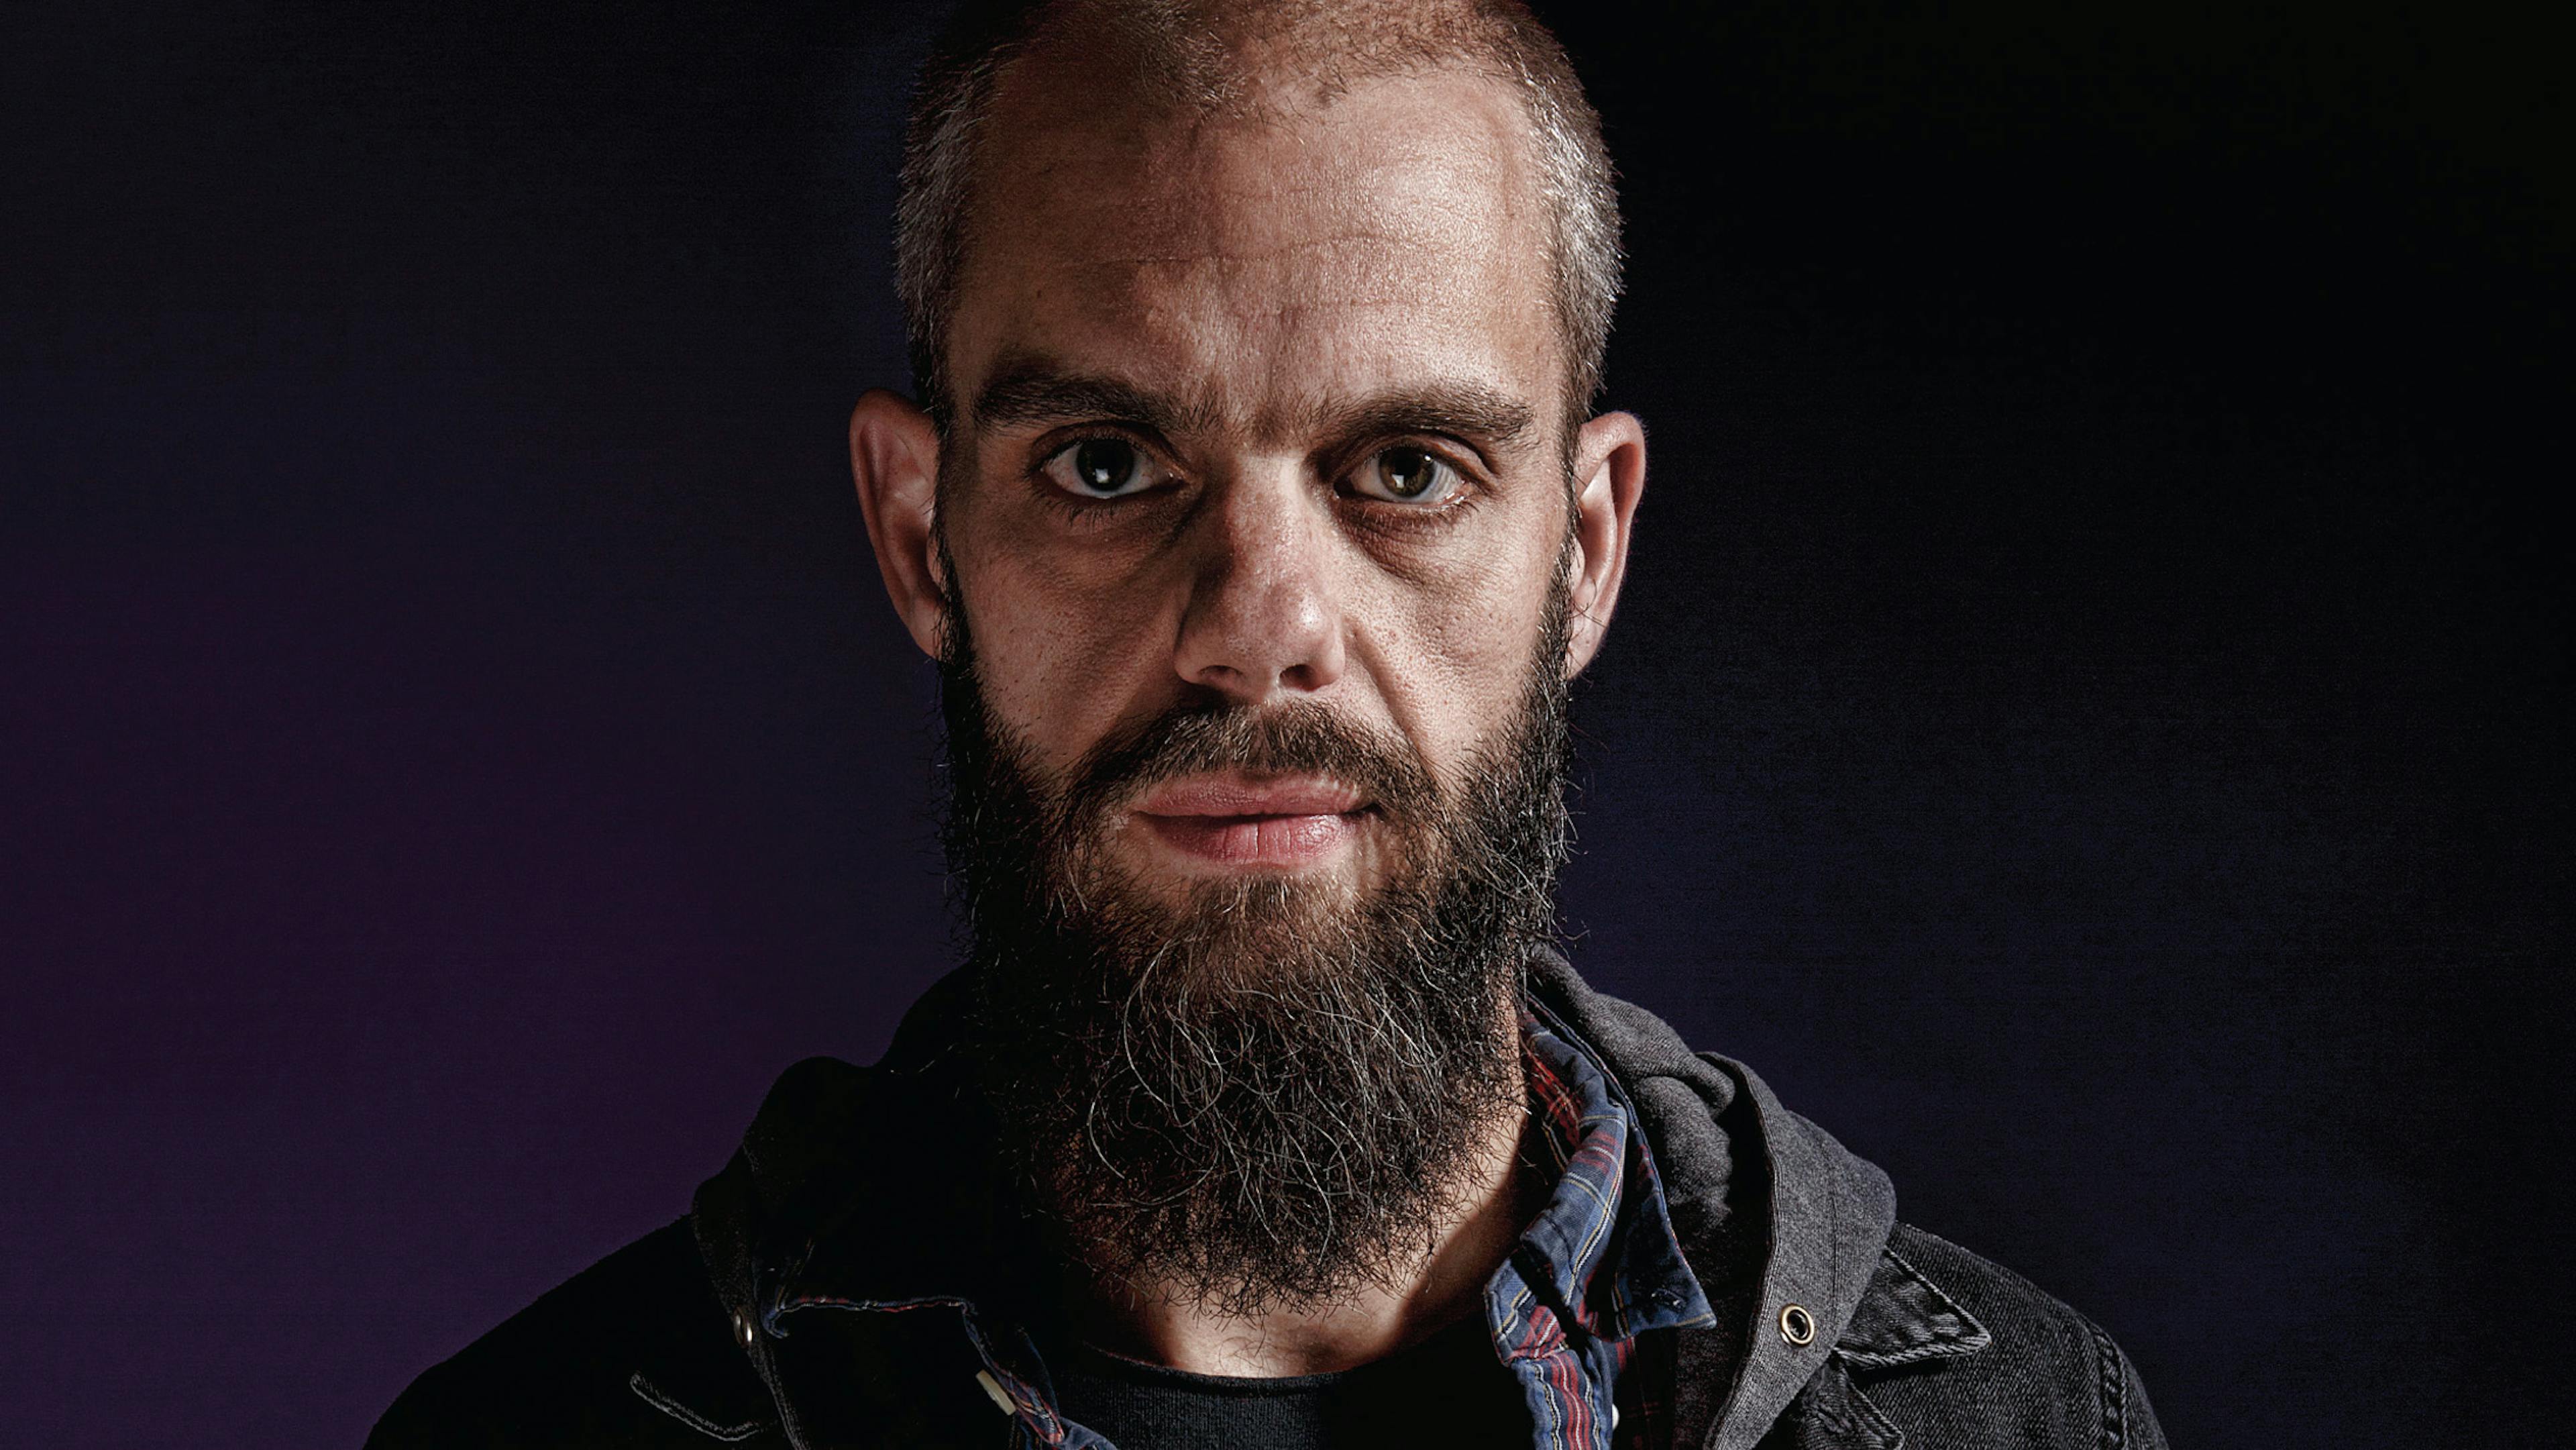 Baroness’ John Dyer Baizley: The 10 songs that changed my life